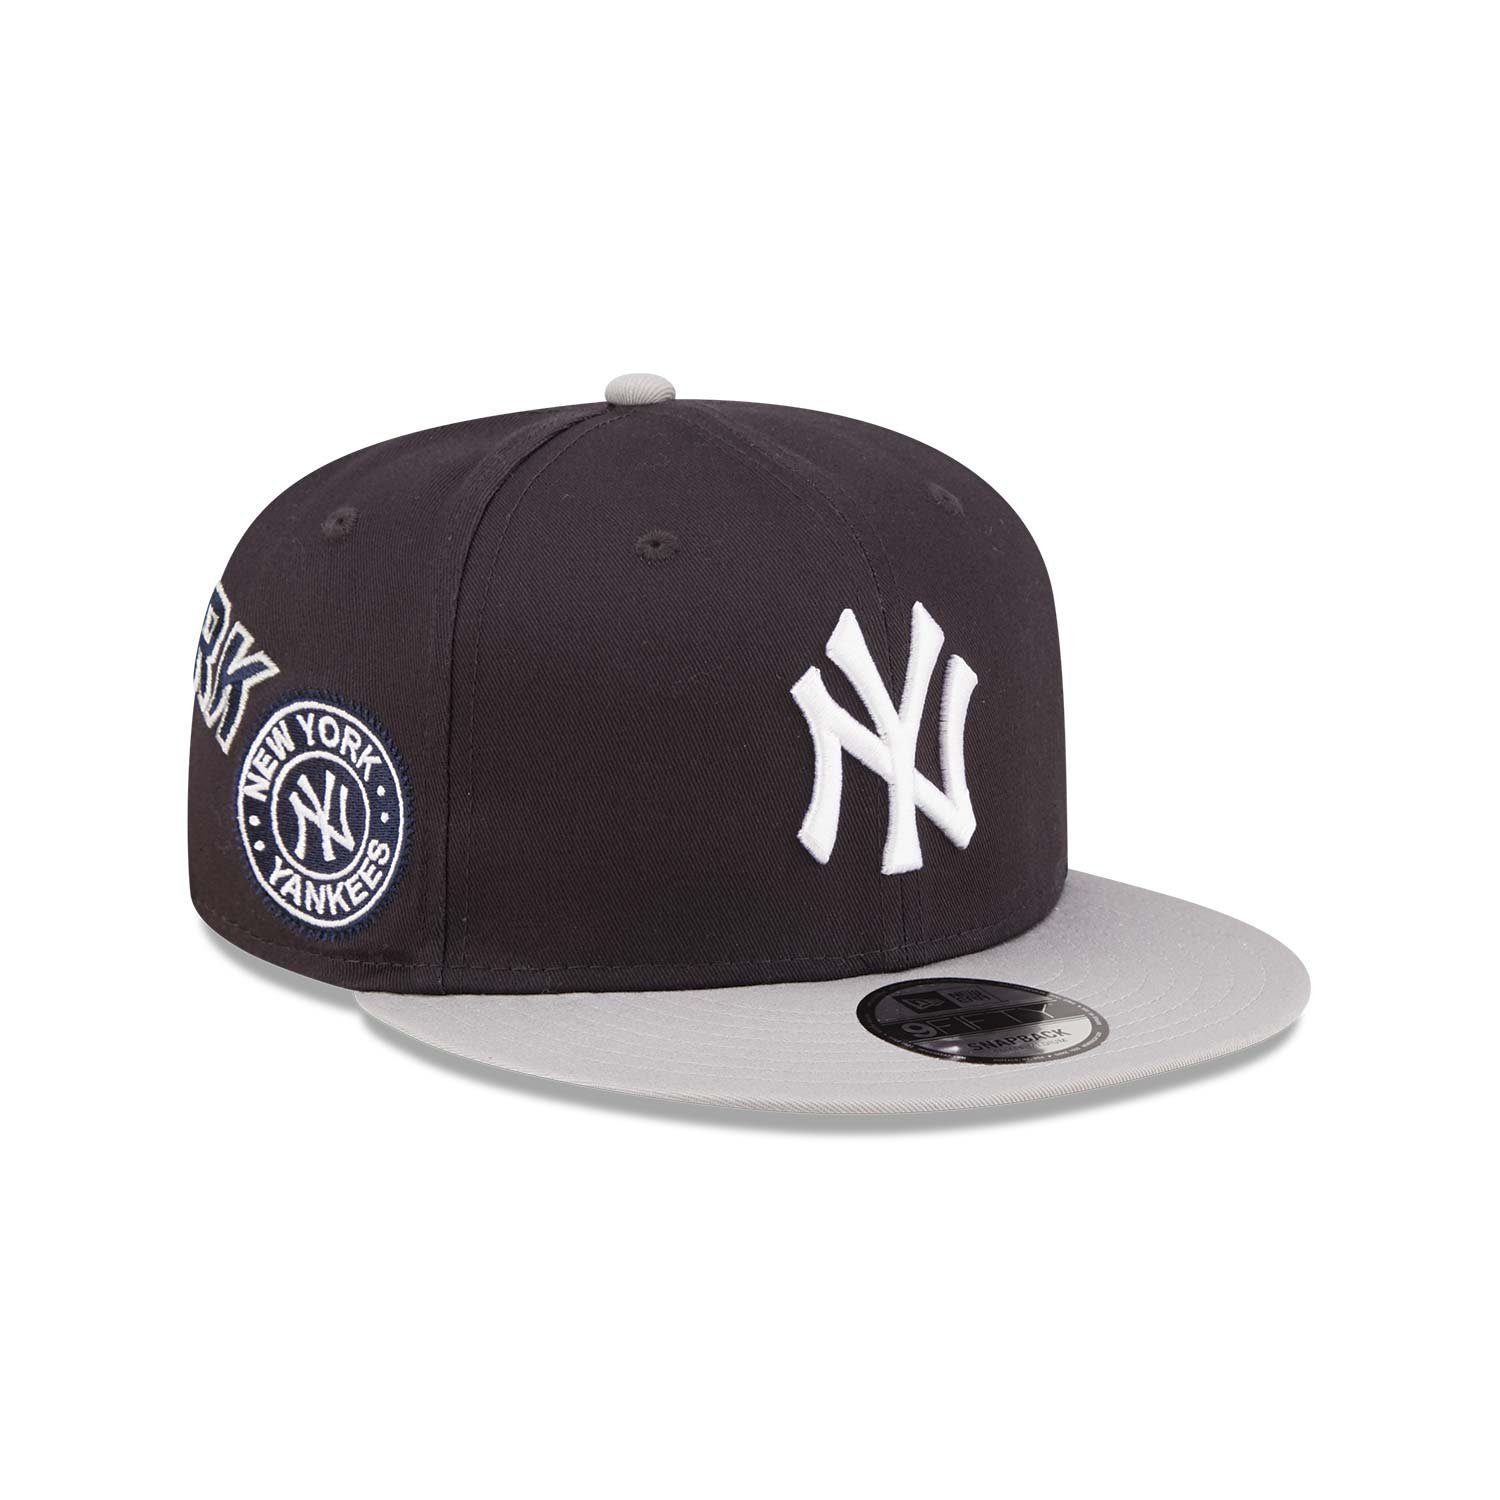 New Era Baseball Cap 9FIFTY All Over Patches New York Yankees